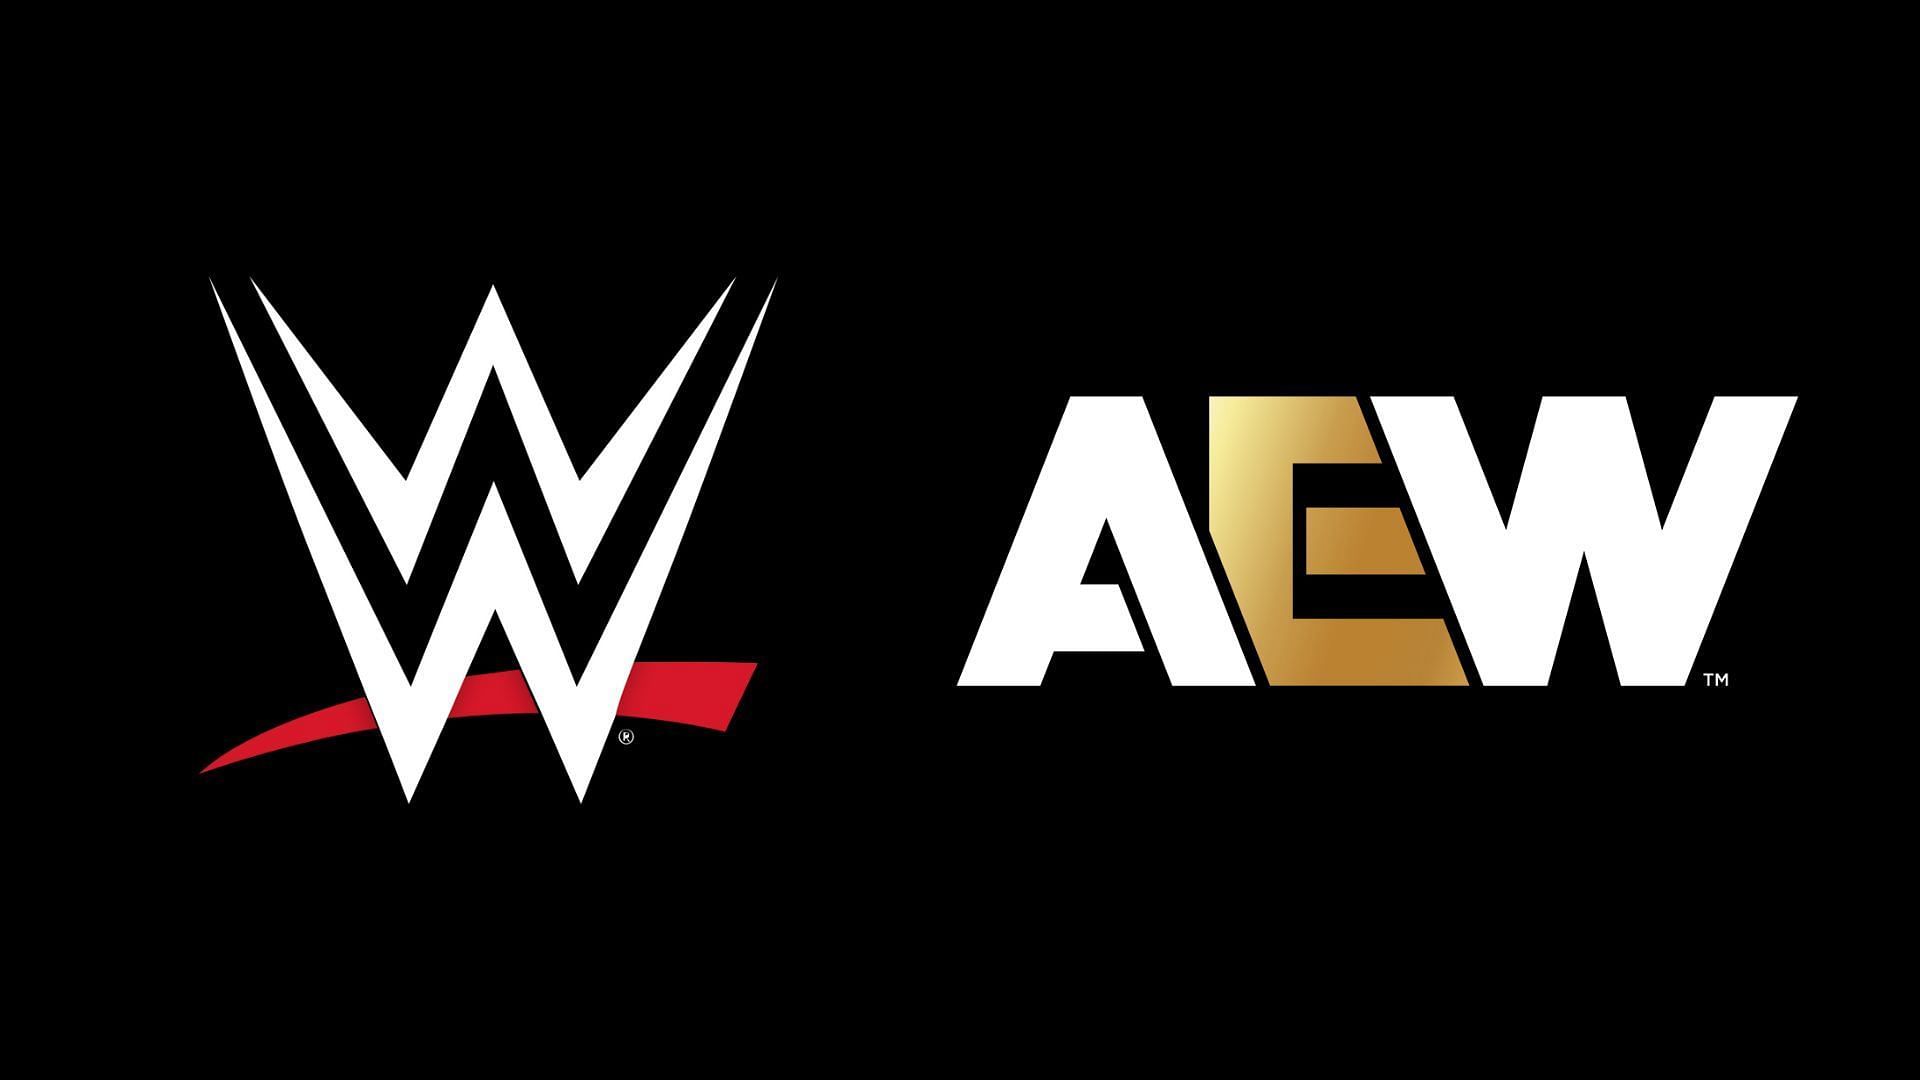 WWE and AEW are top players in the wrestling industry [logos courtesy of their respective social media accounts]